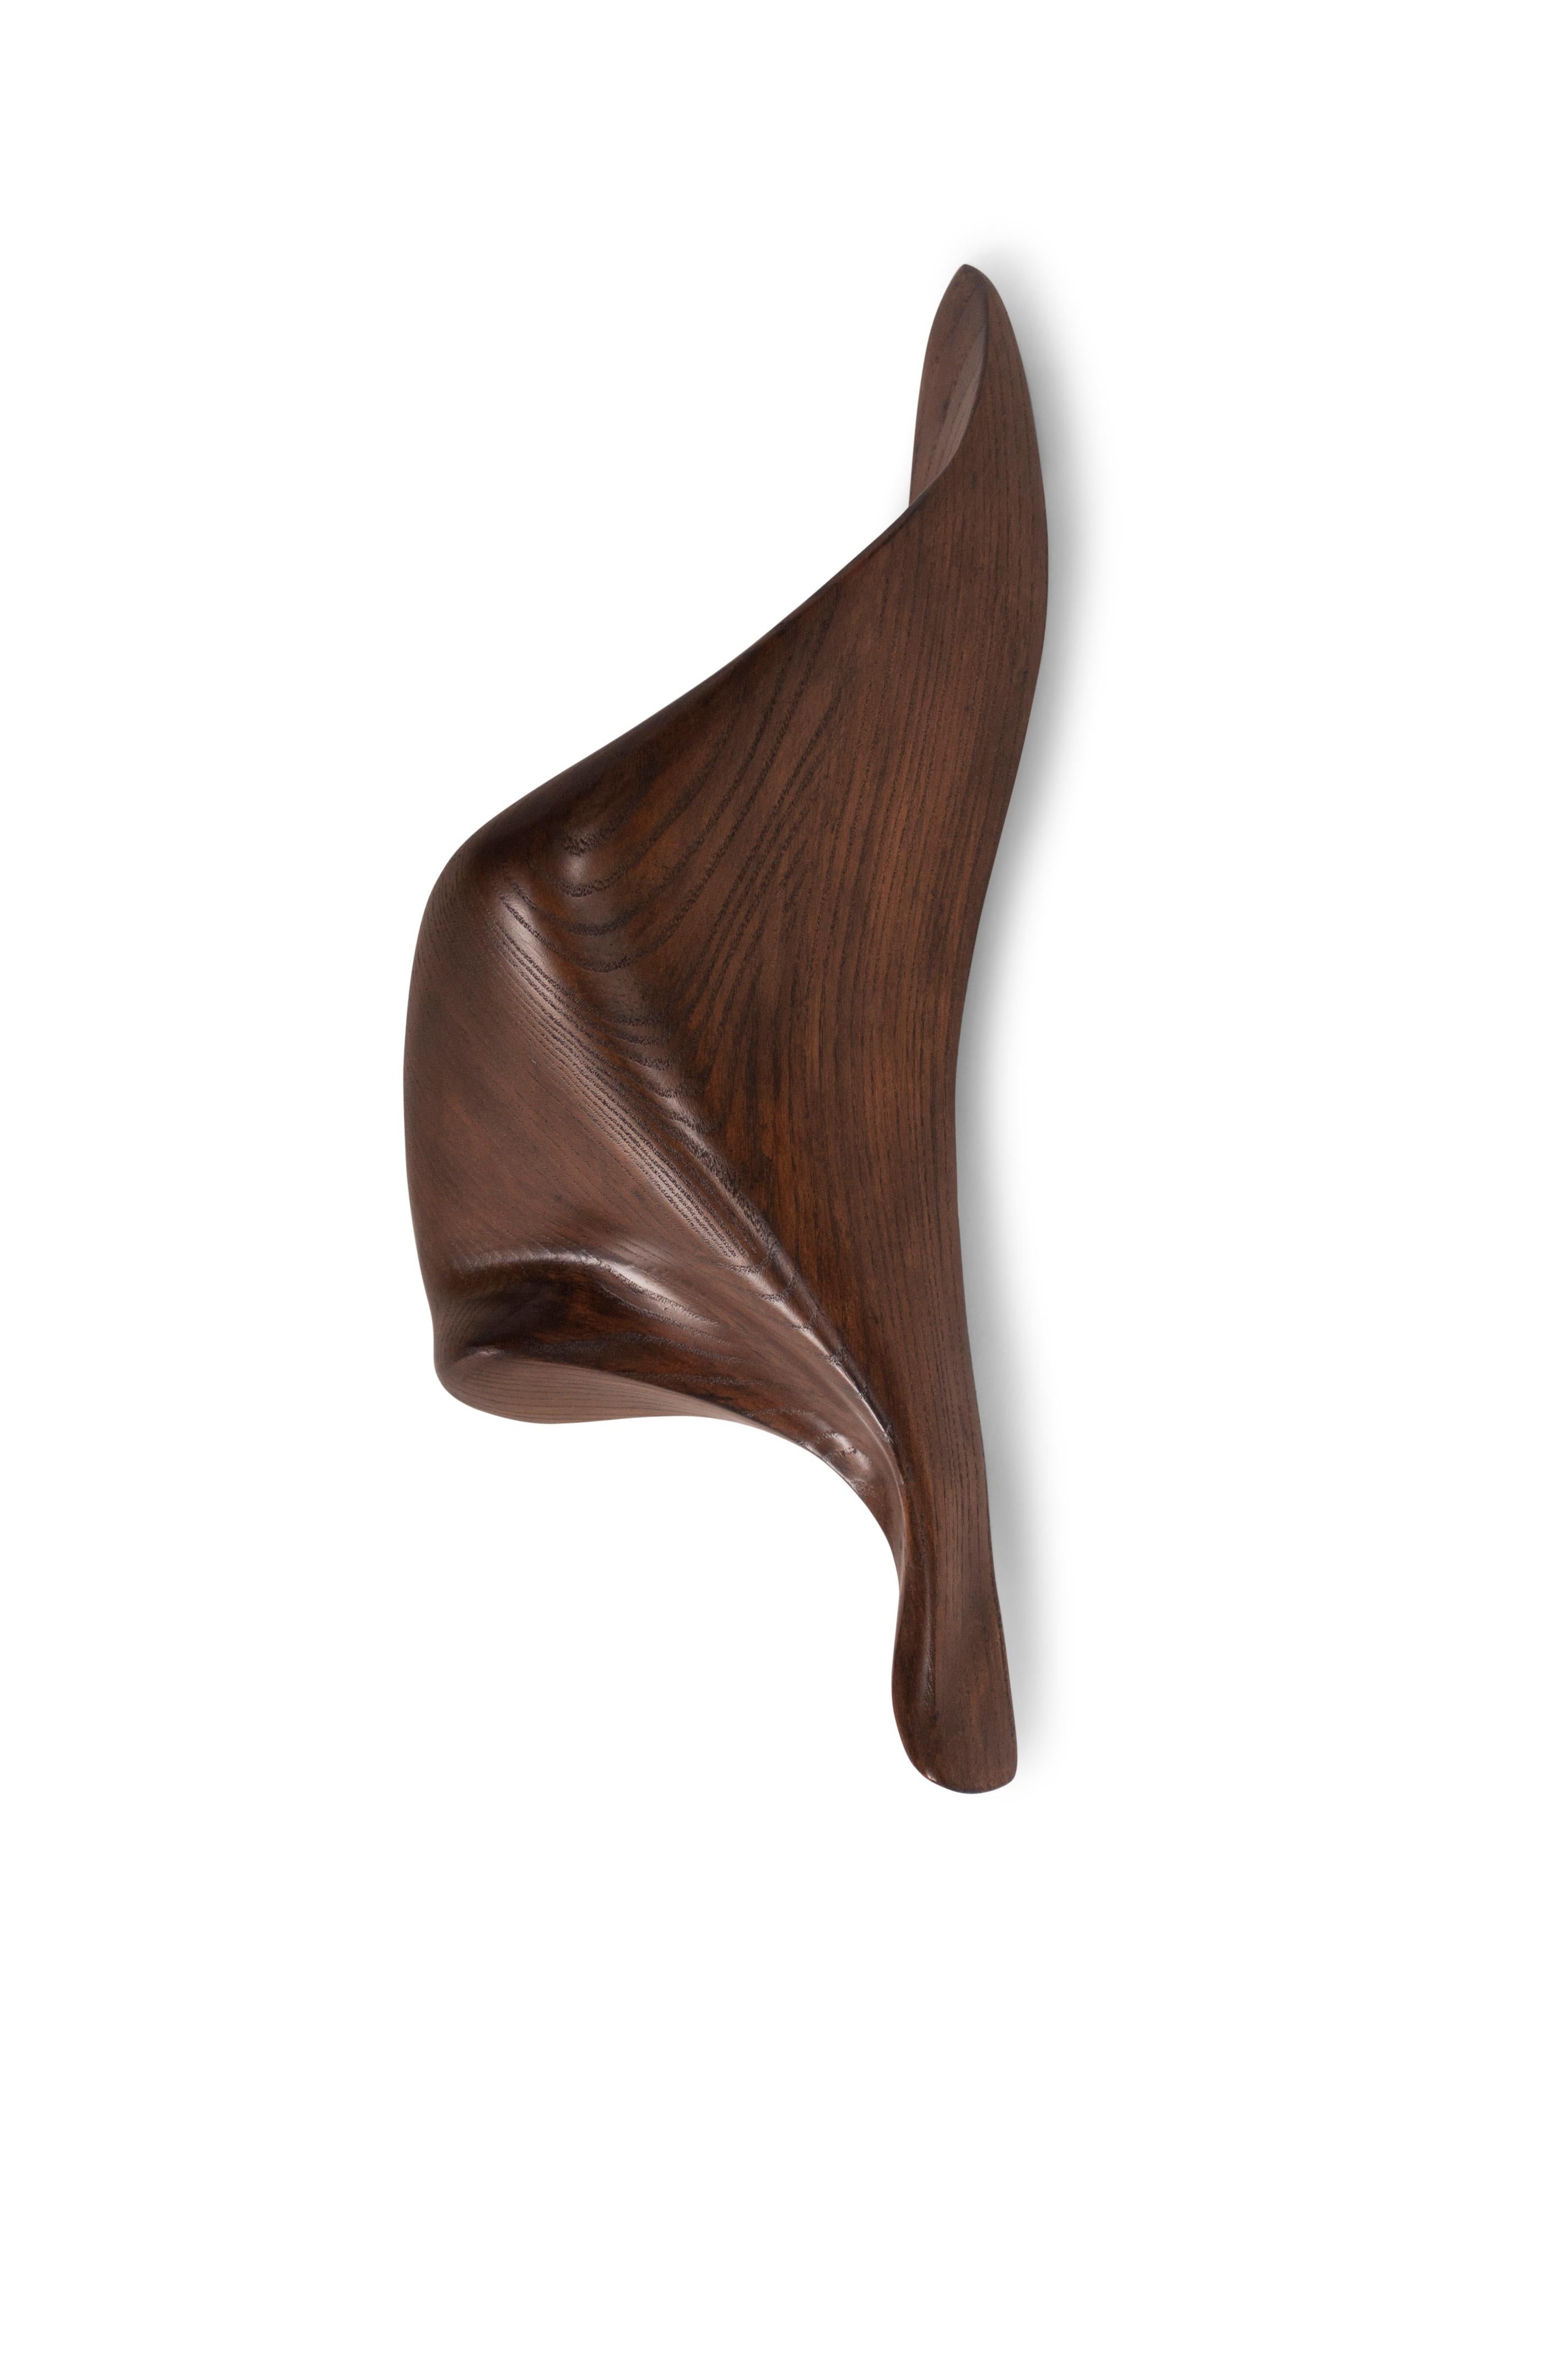 Wall light sconces is made out of wood with graphite walnut stained finish. Dimension 9